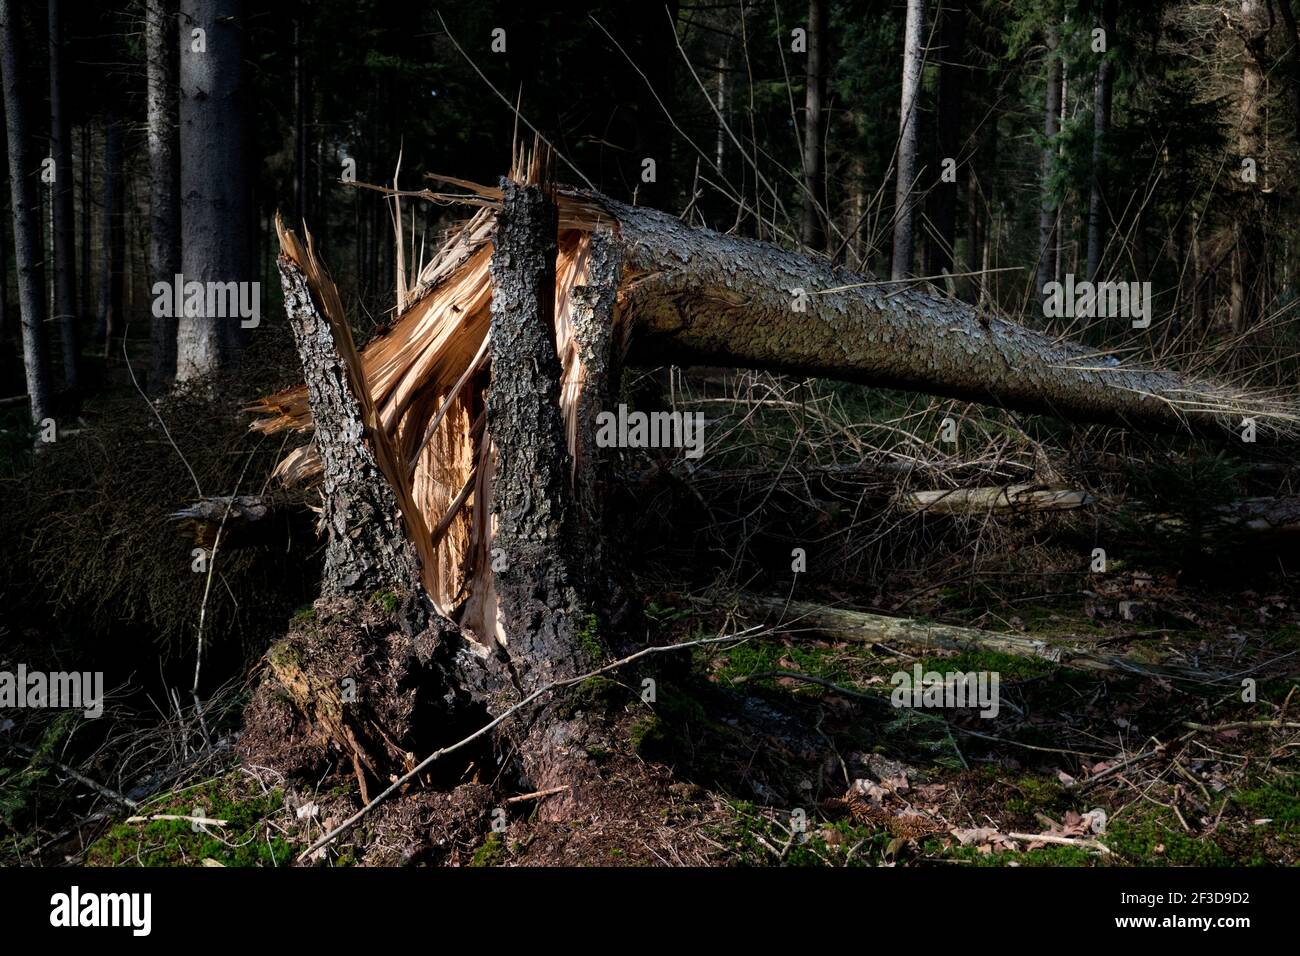 Storm damage: cracked pine tree in a forest Stock Photo